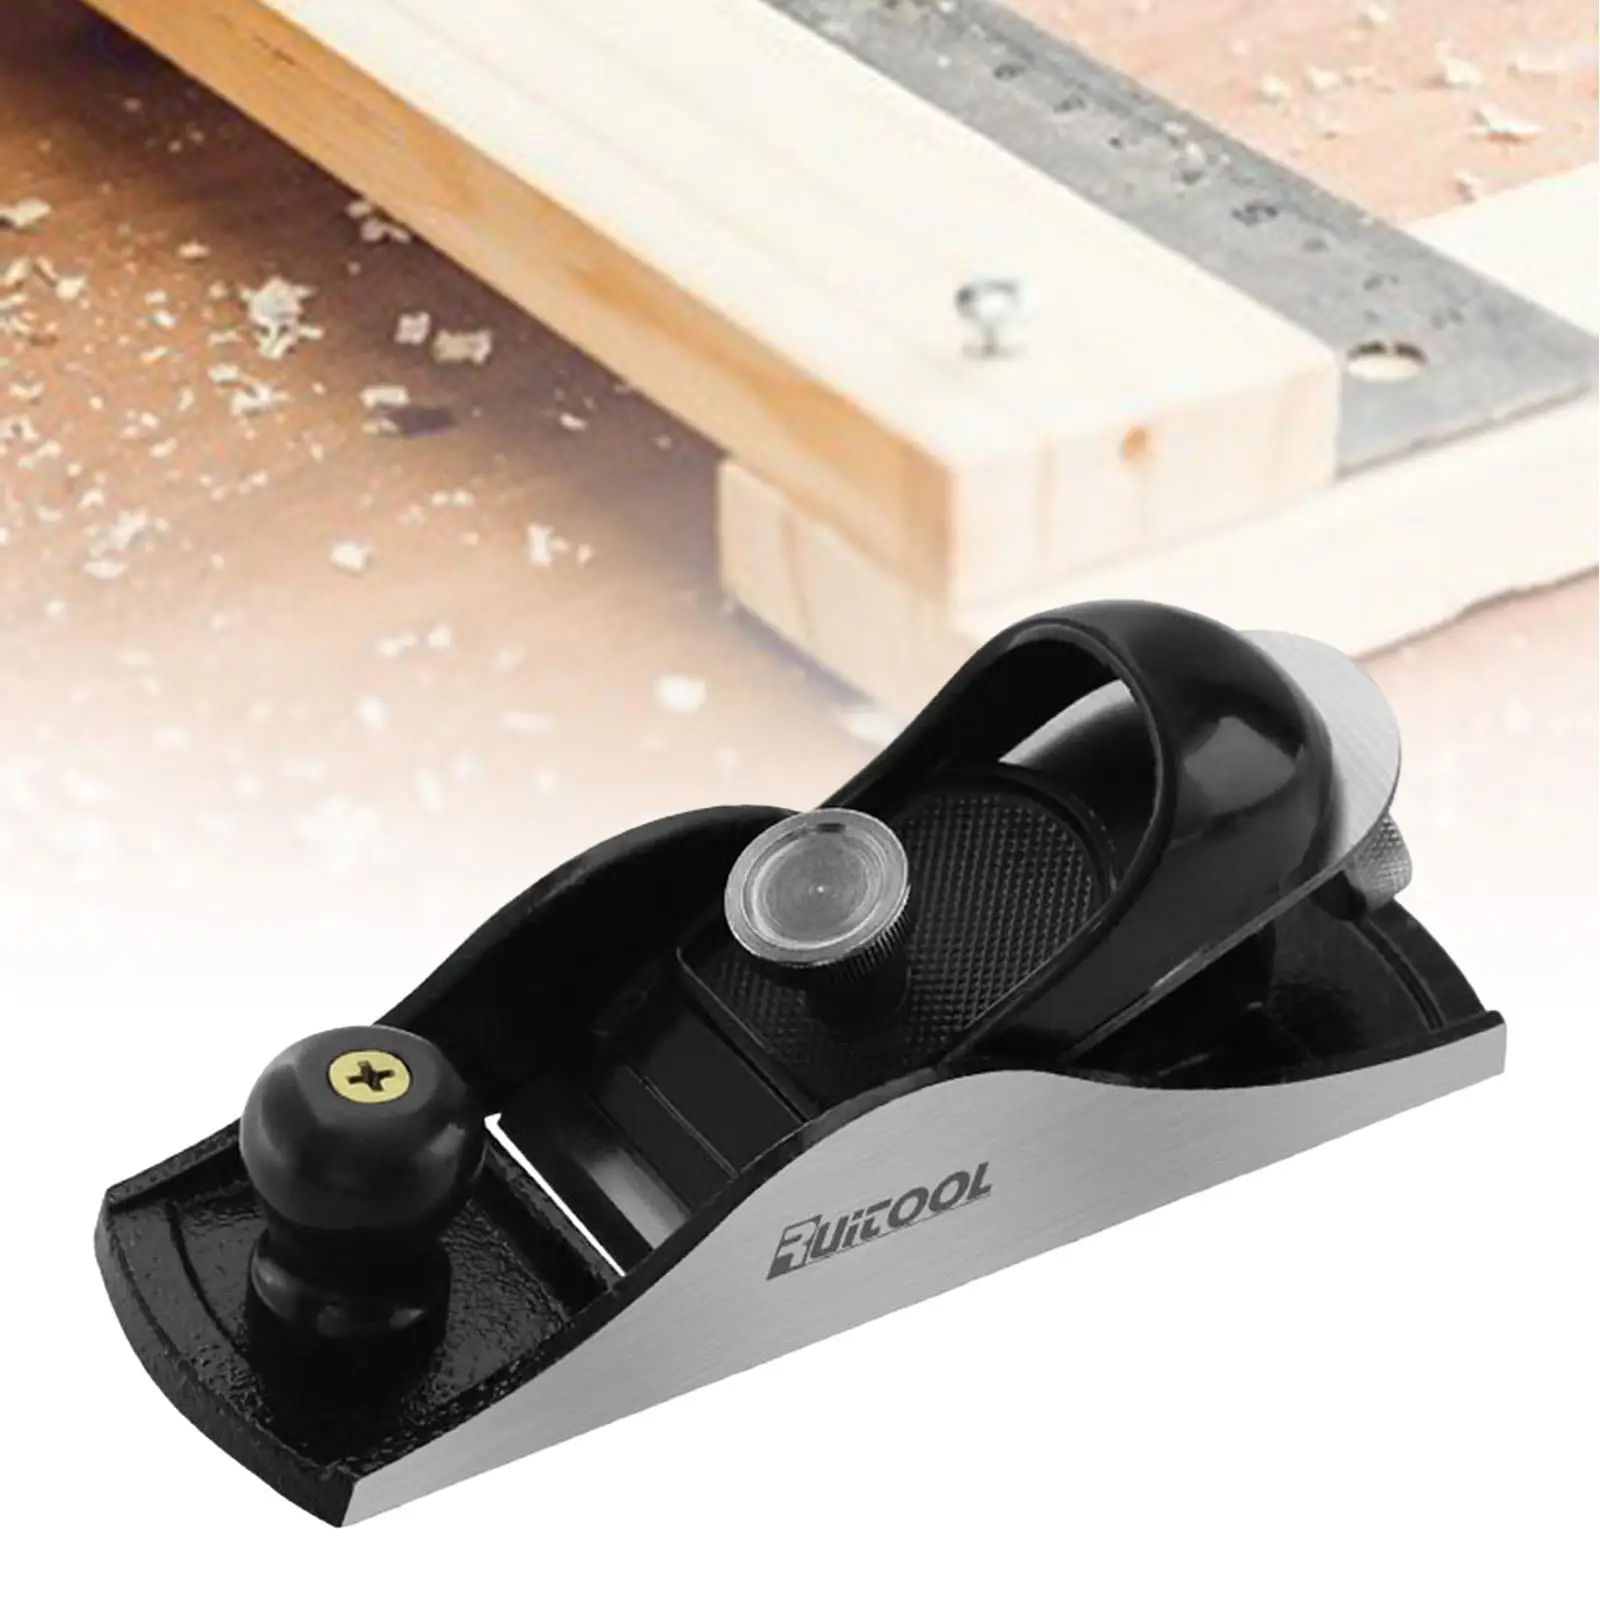 Wood Planer Manual Portable Door Planer Surface Smoothing Bench Plane DIY Gadgets Hand Plane for Woodcraft Tool Trimming